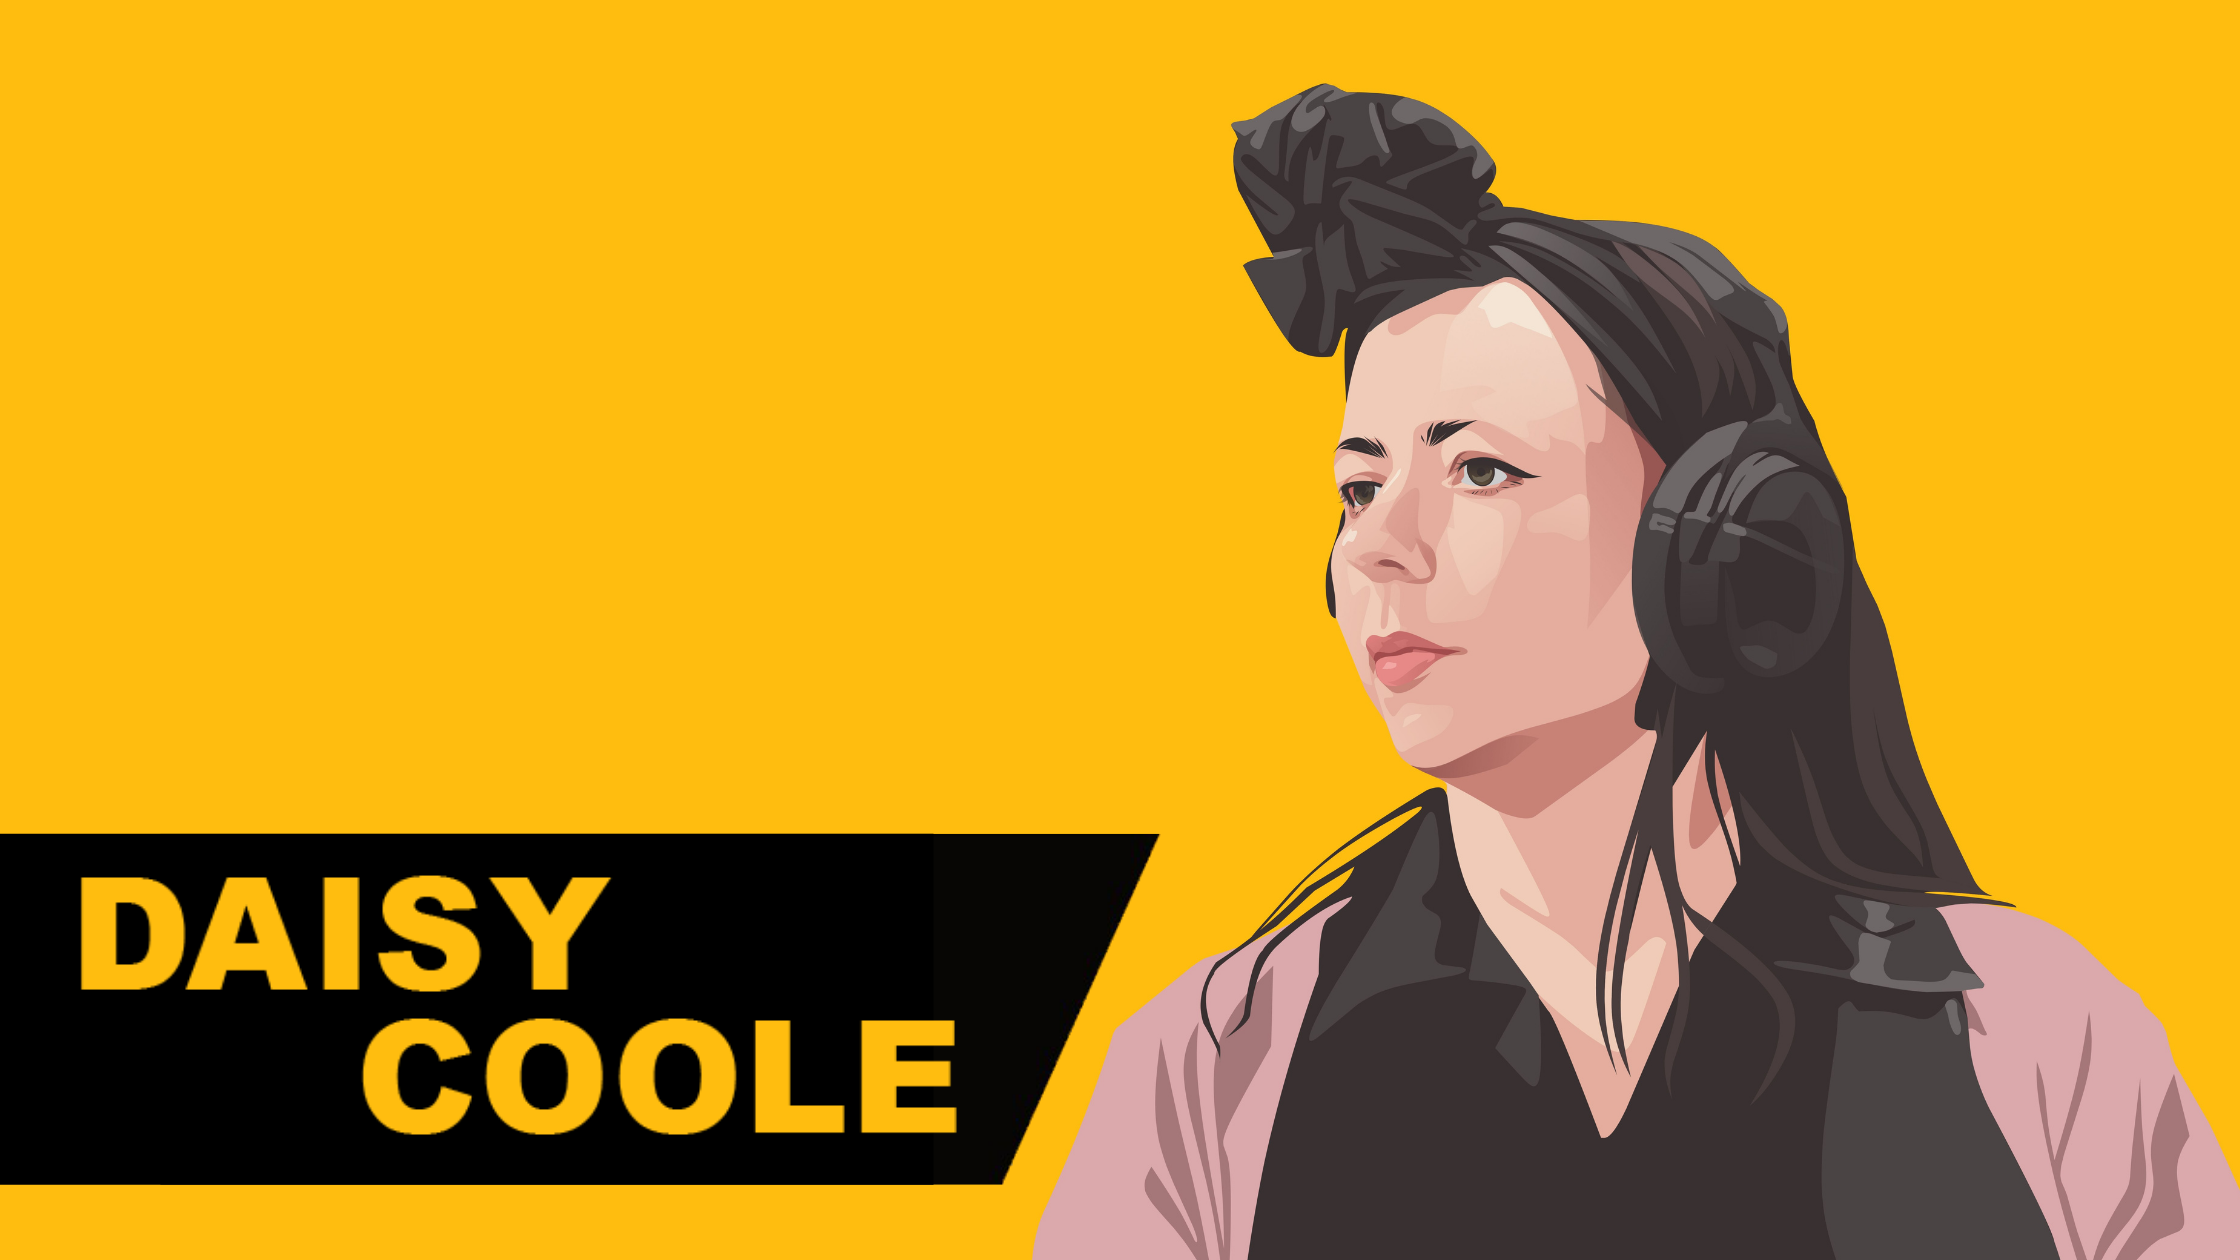 Battling imposter syndrome, letting passion drive your work, and the “crazy stupid money” game with Daisy Coole